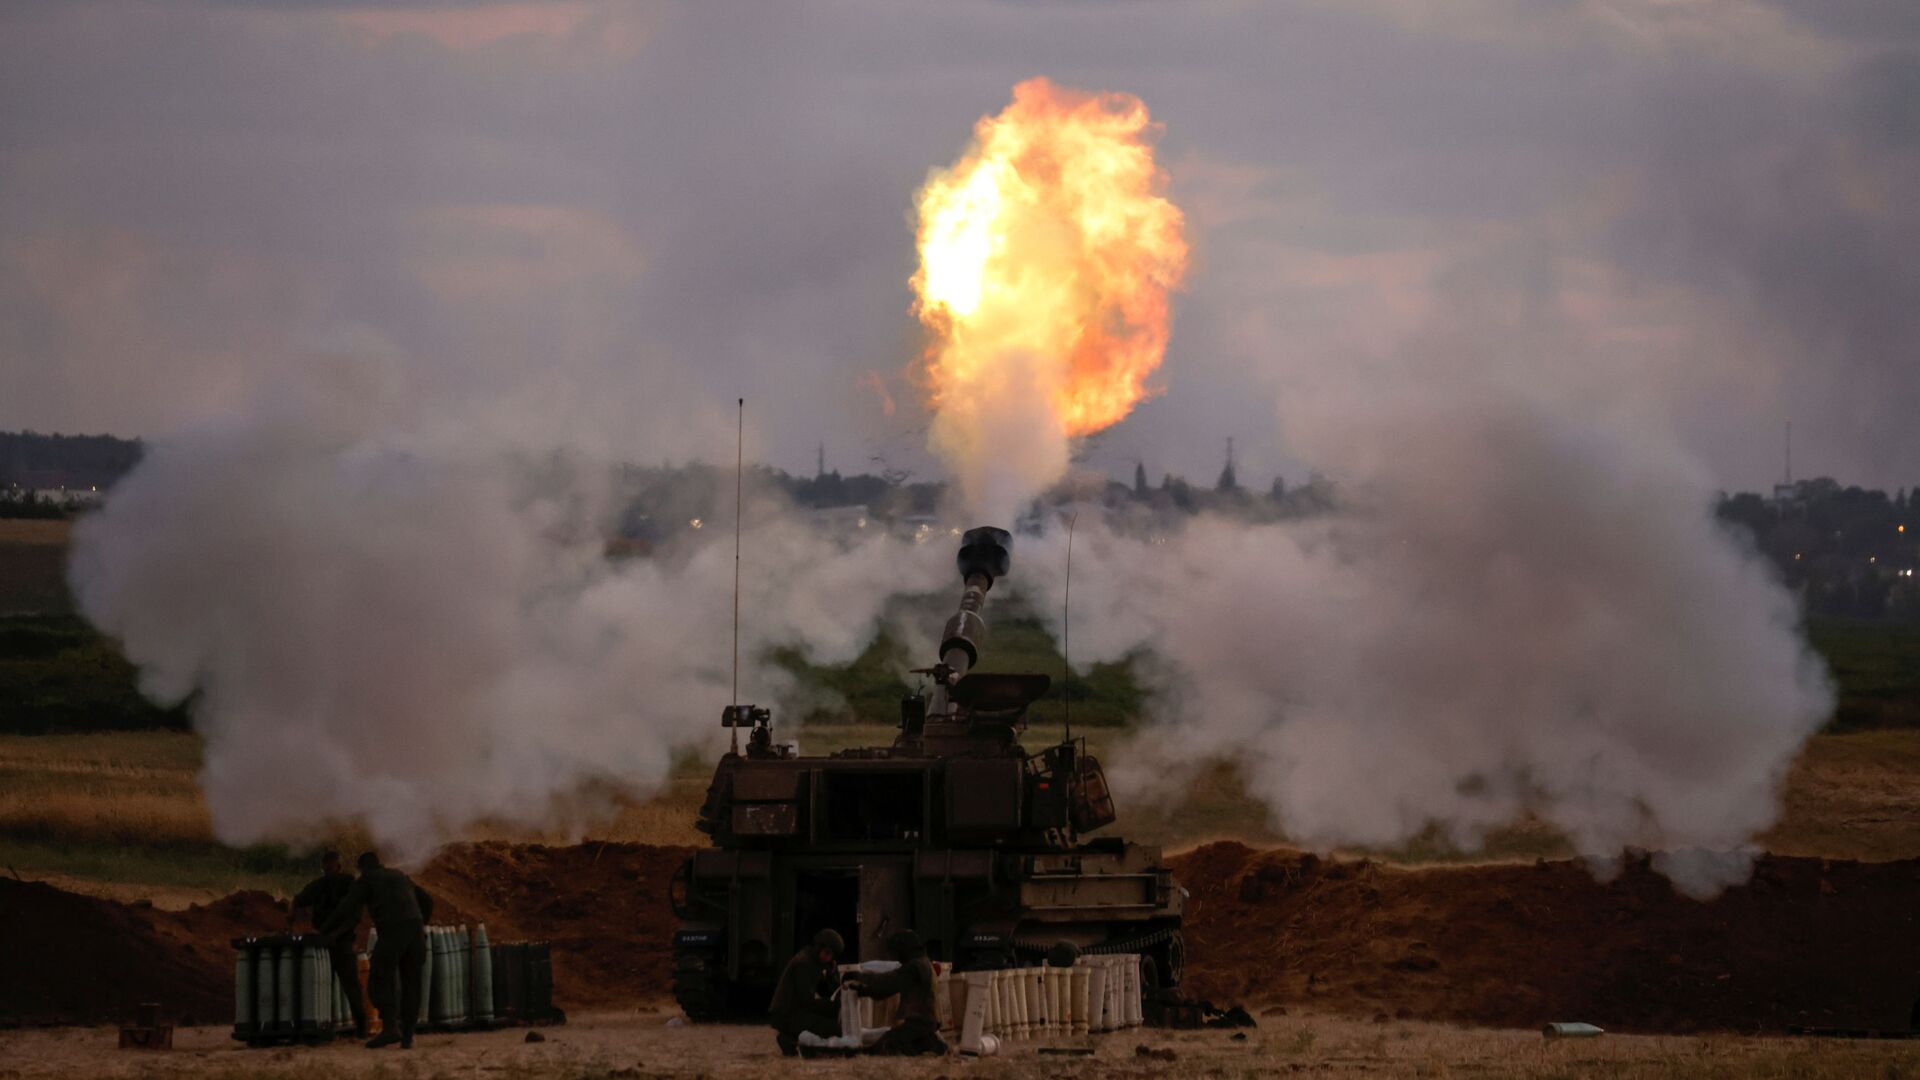 Israeli soldiers work at an artillery unit as it fires near the border between Israel and the Gaza strip, on the Israeli side May 17, 2021 - Sputnik International, 1920, 13.03.2022